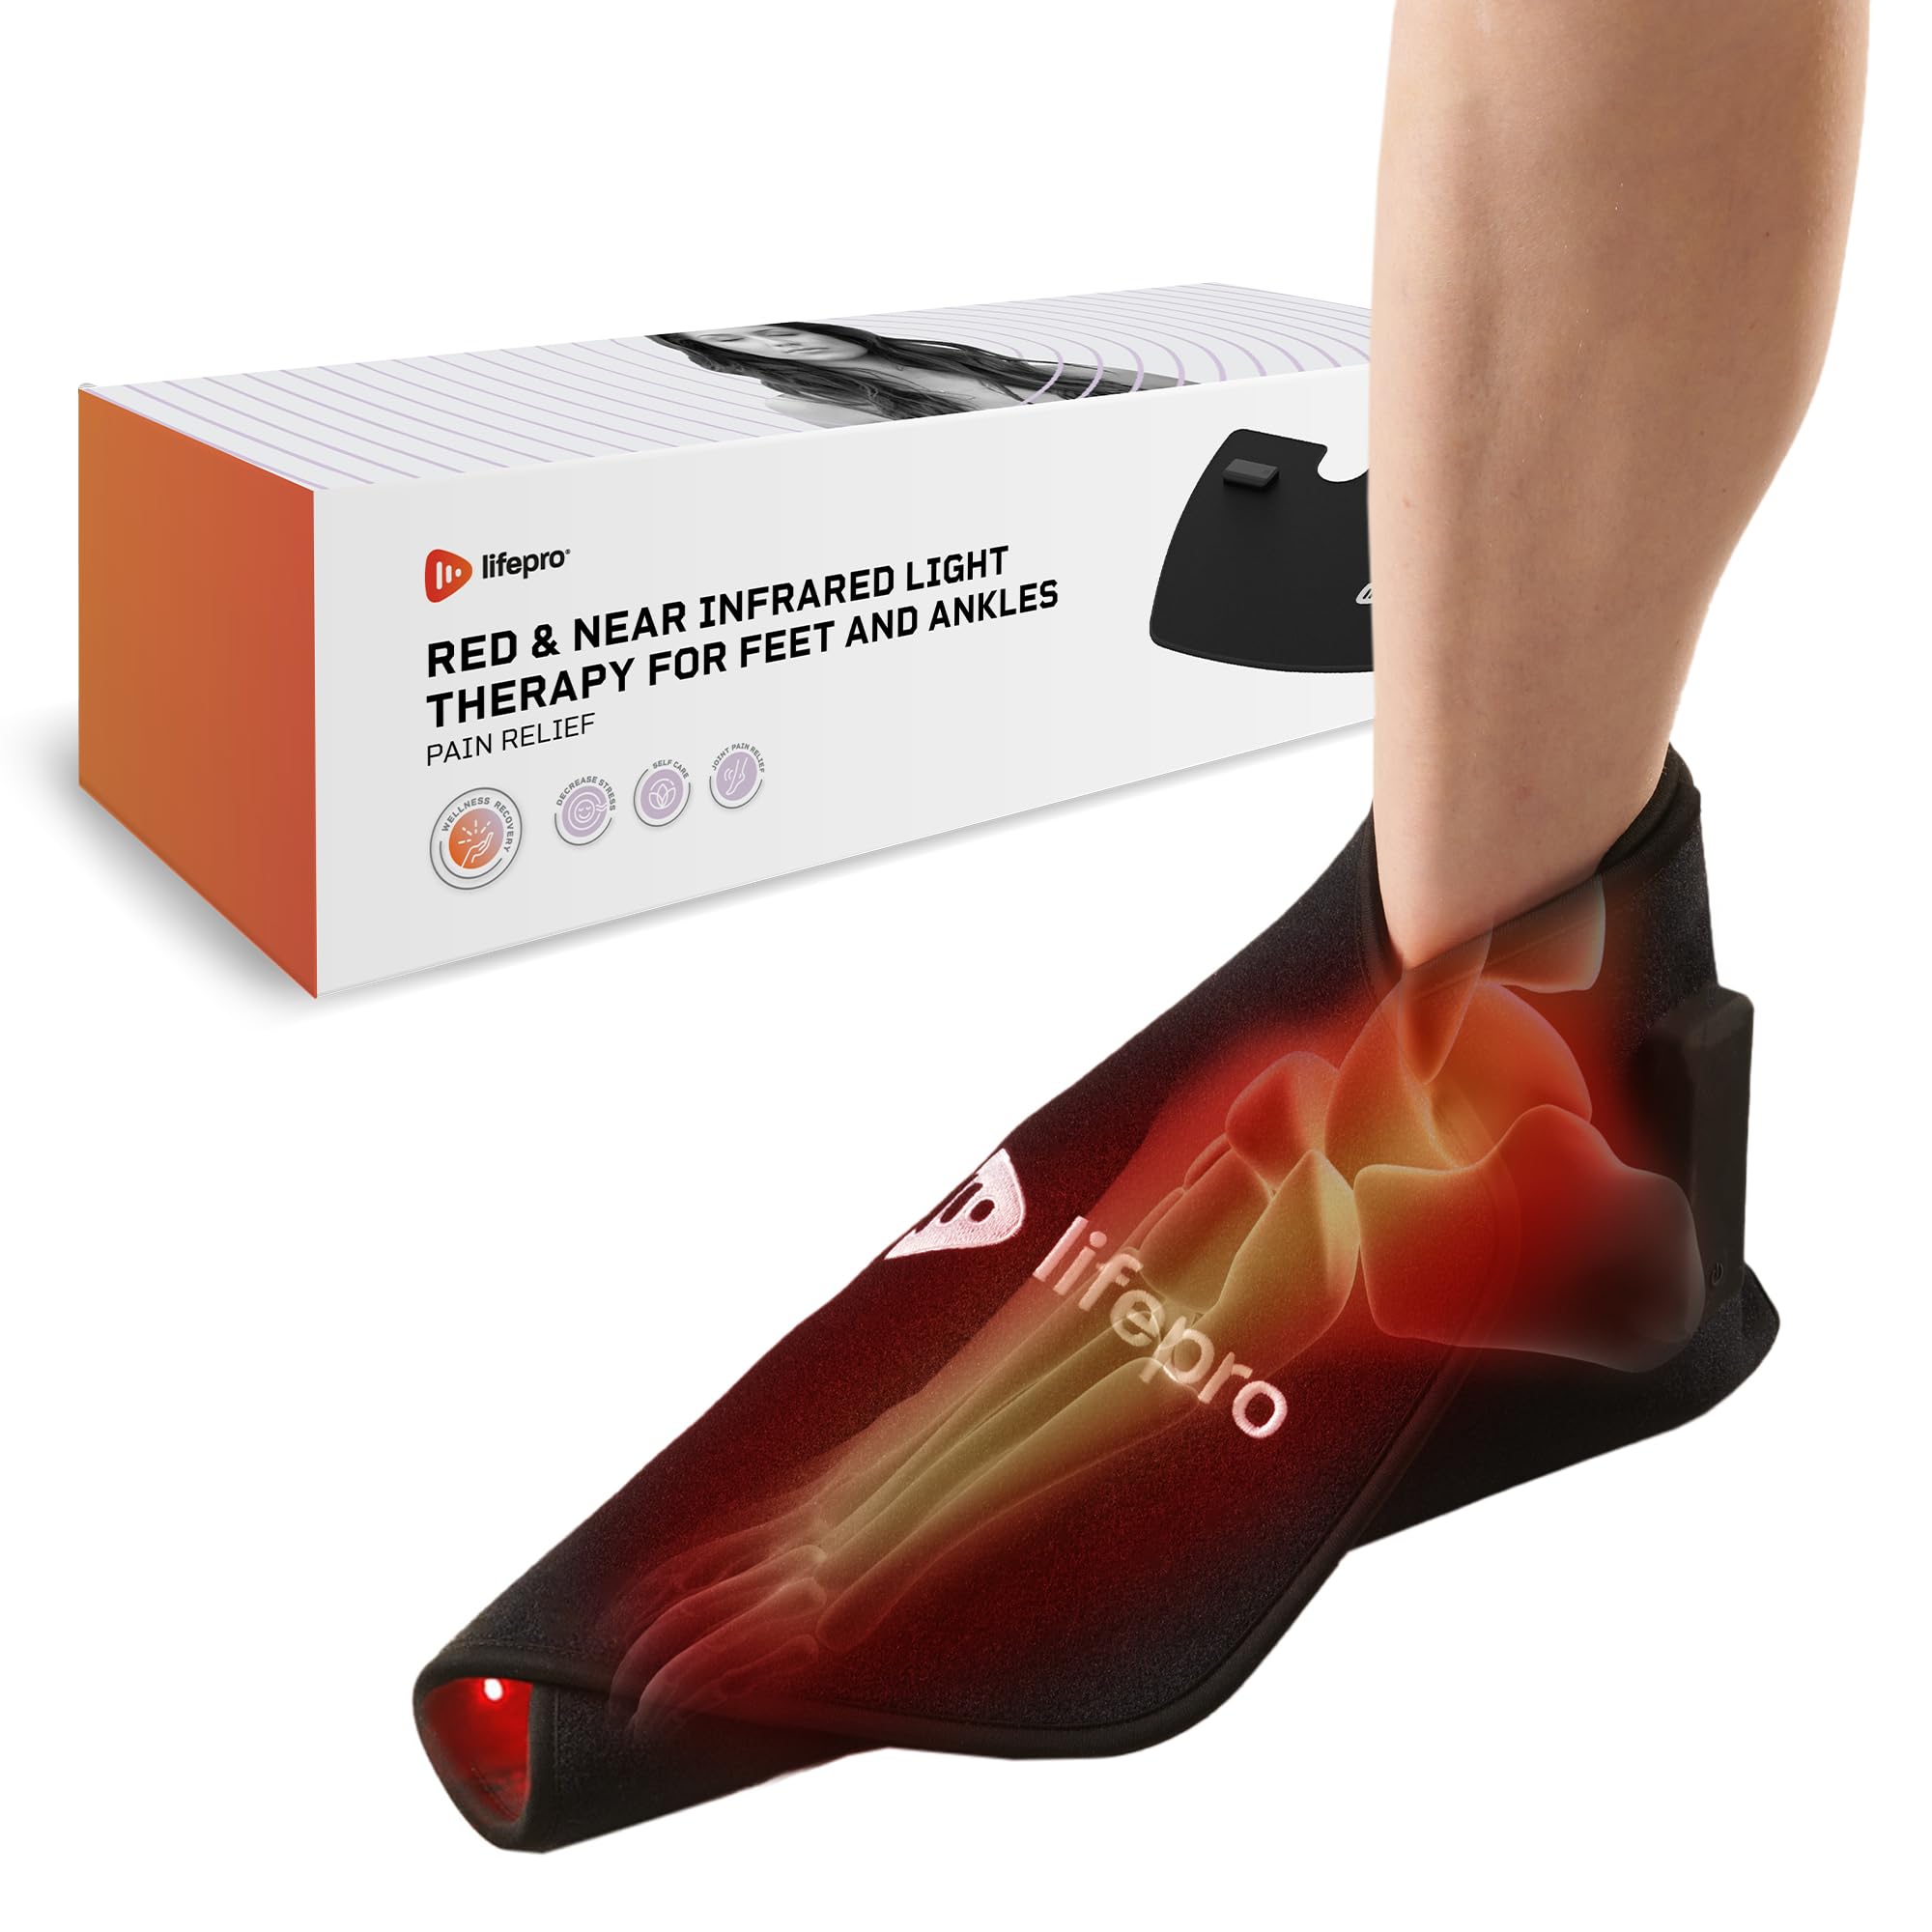 Lifepro Red Light Therapy for Feet & Ankle Brace-Foot Pain Relief Product for Heel Pain Relief, Accelerated Recovery, & Improved Circulation-Near Infrared Red Light Therapy Shoe for Feet, Ankle, Toes